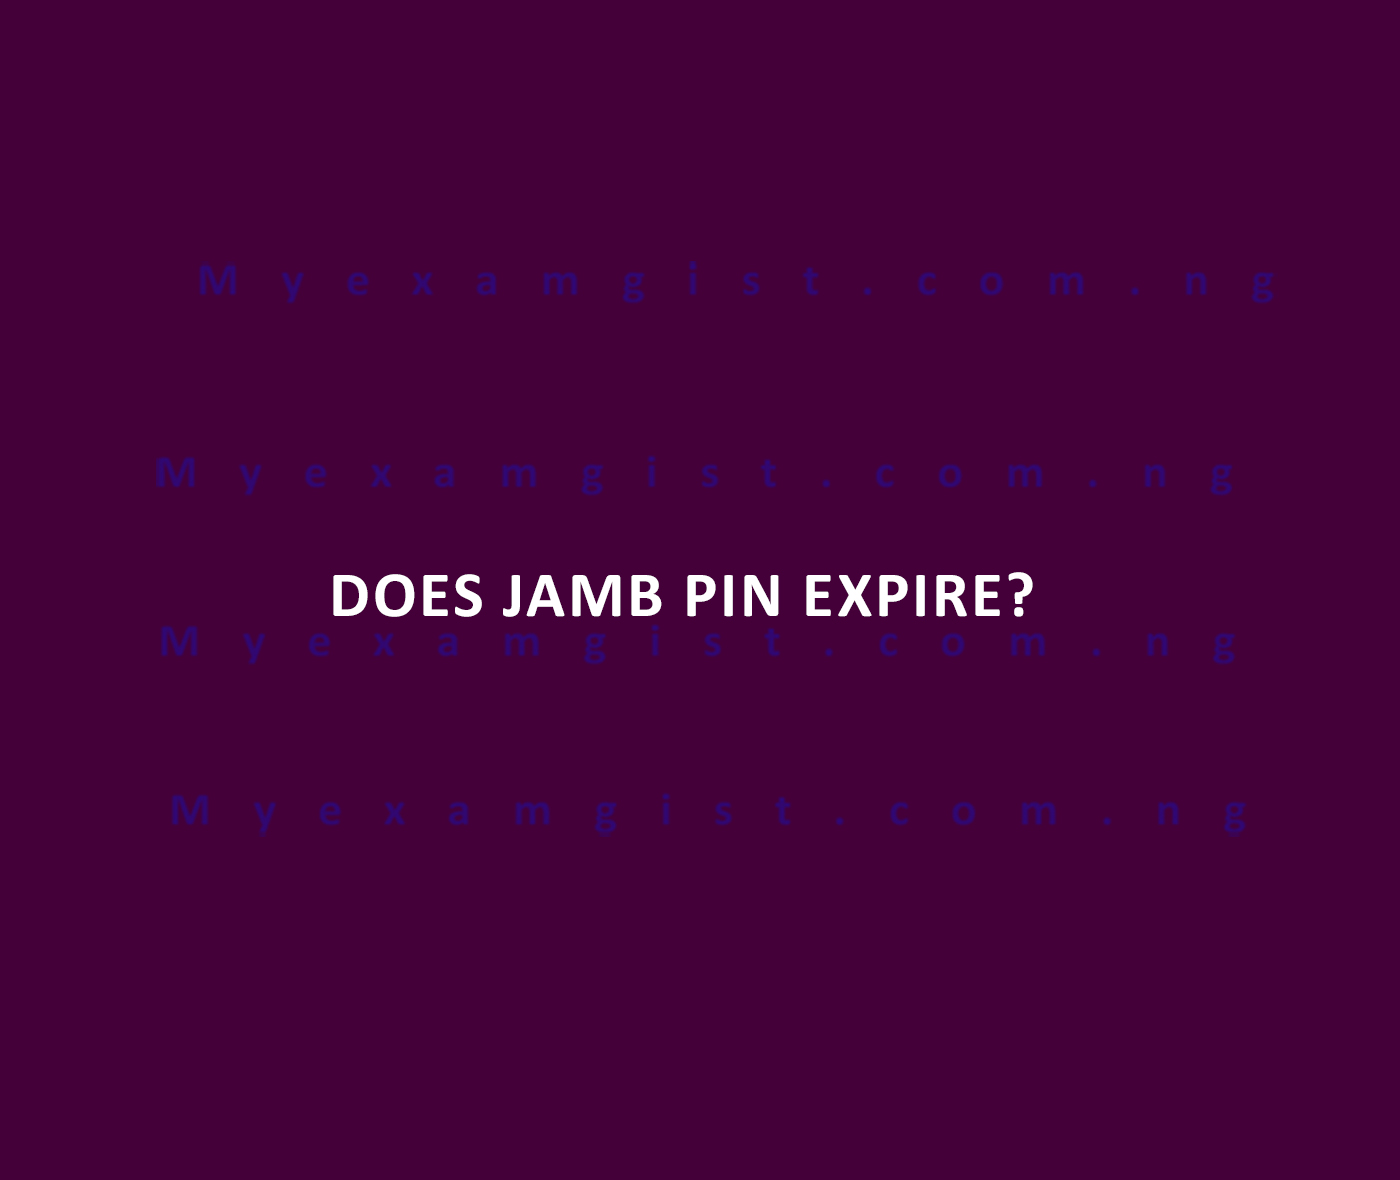 Does JAMB pin expire?